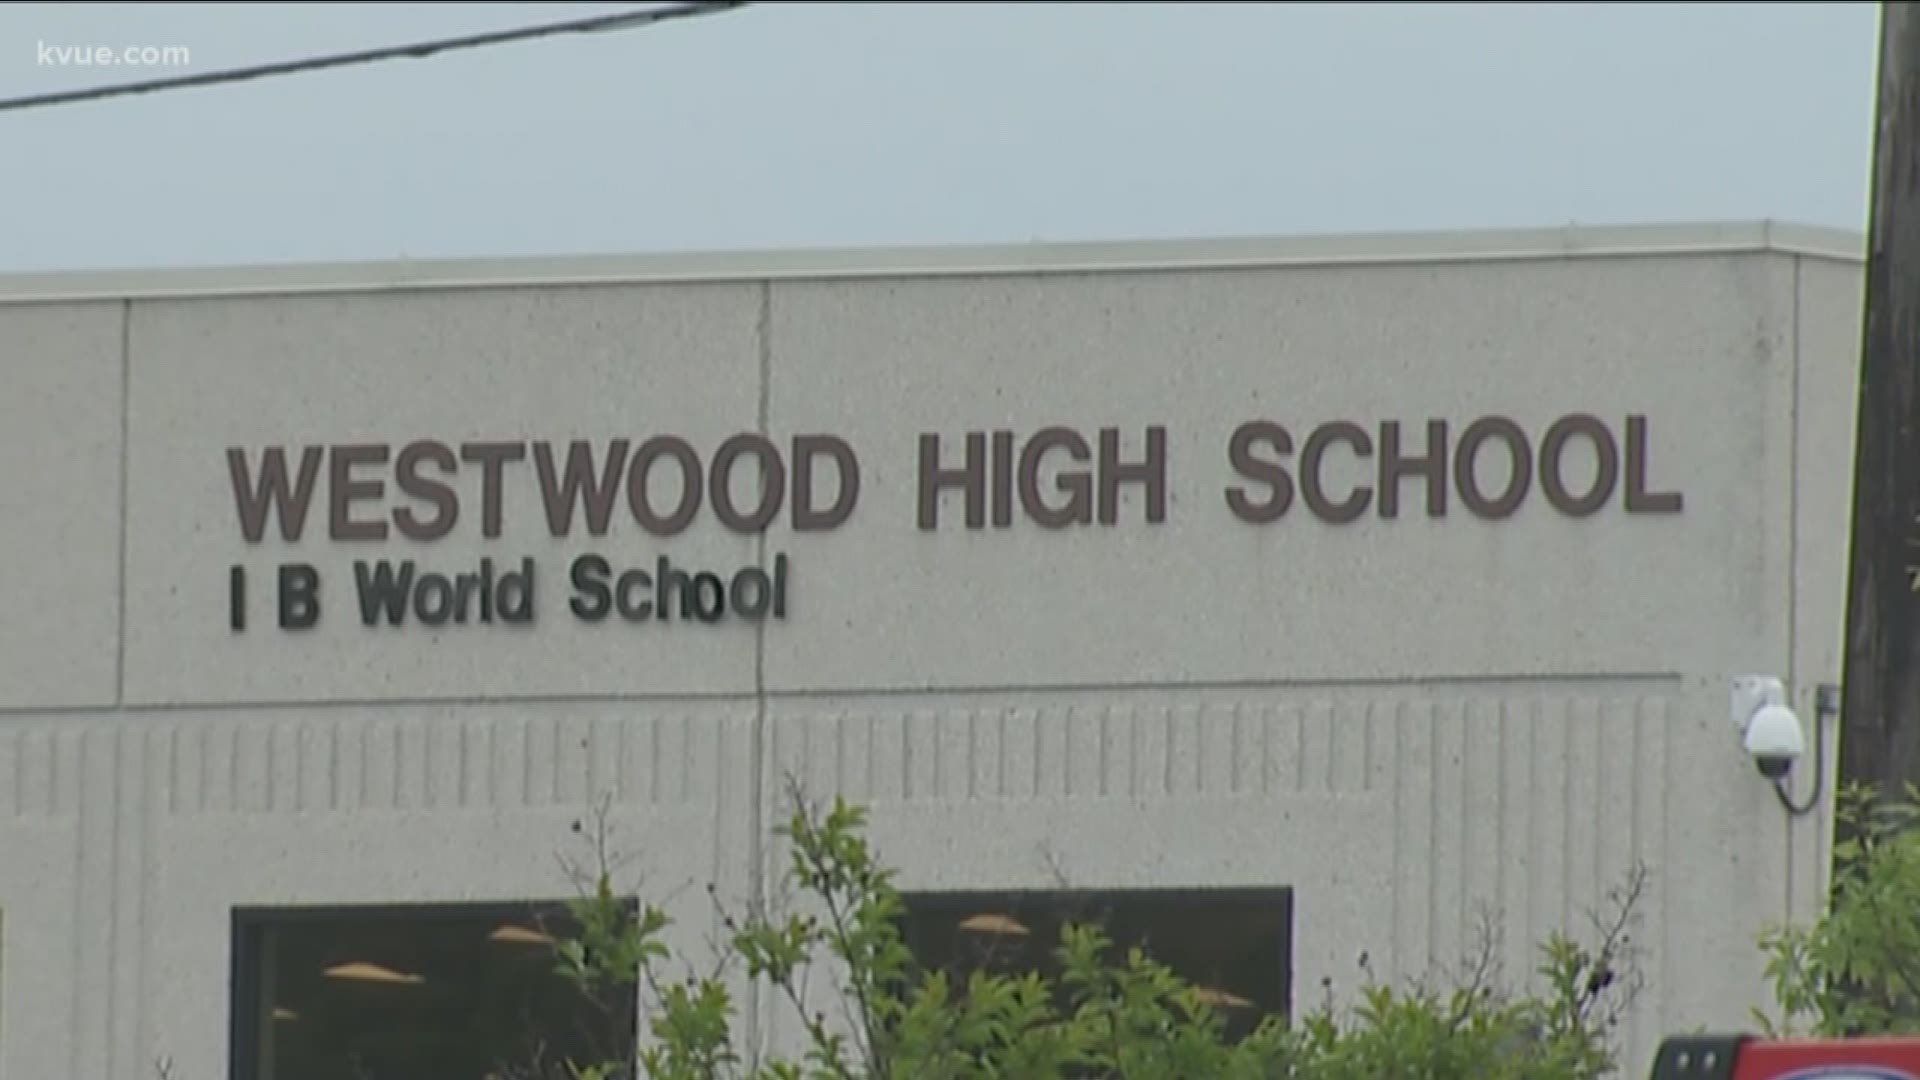 A lockdown has been lifted at Westwood High School, but there are no specifics yet as to what caused it.